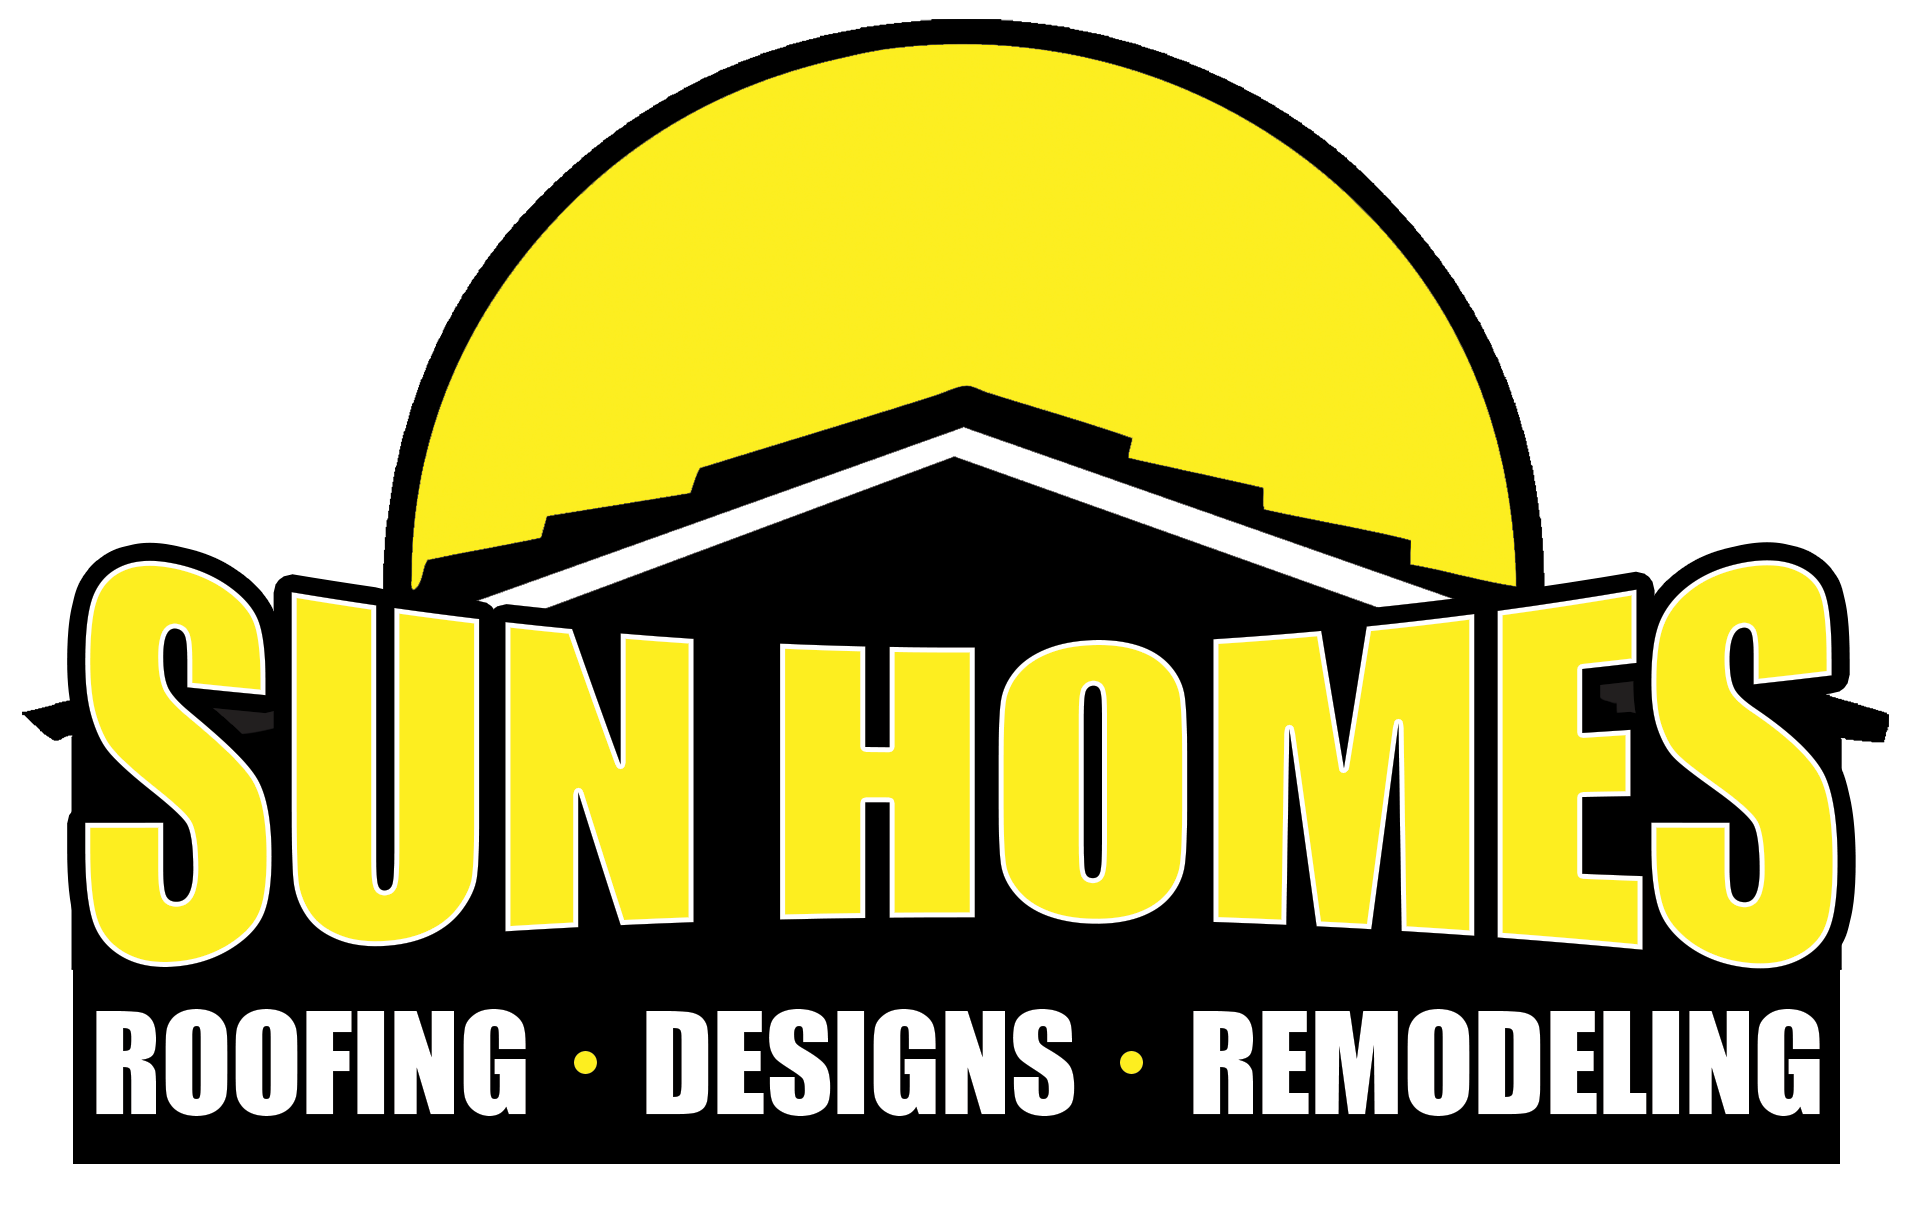 A logo for sun homes roofing , designs , and remodeling.